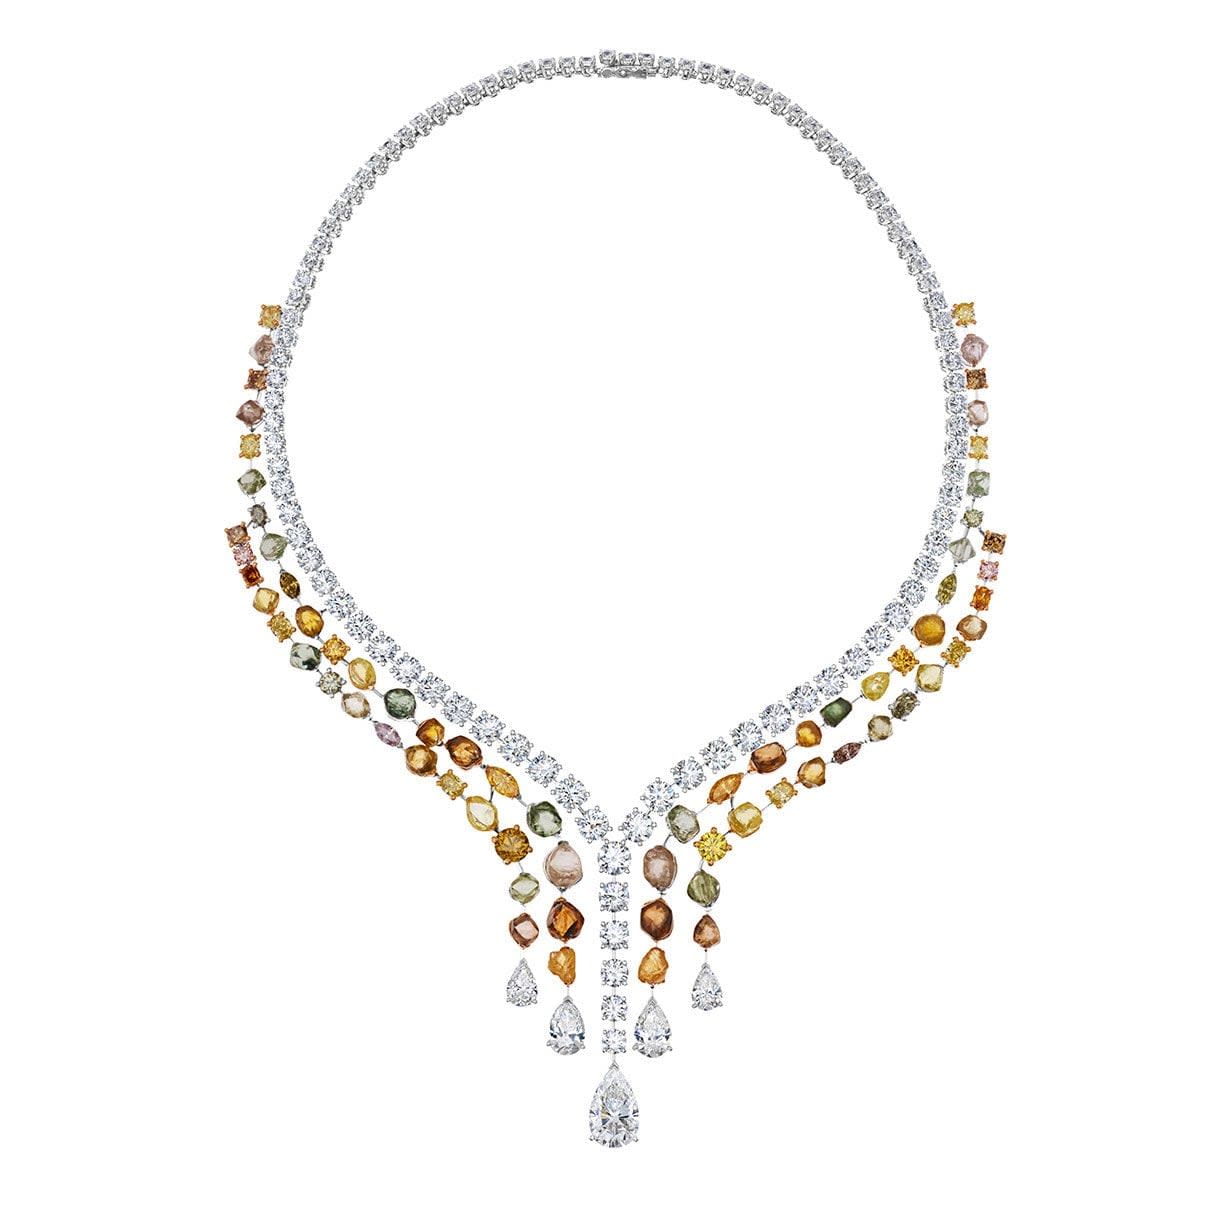 De Beers rough and polished diamond Vulcan necklace